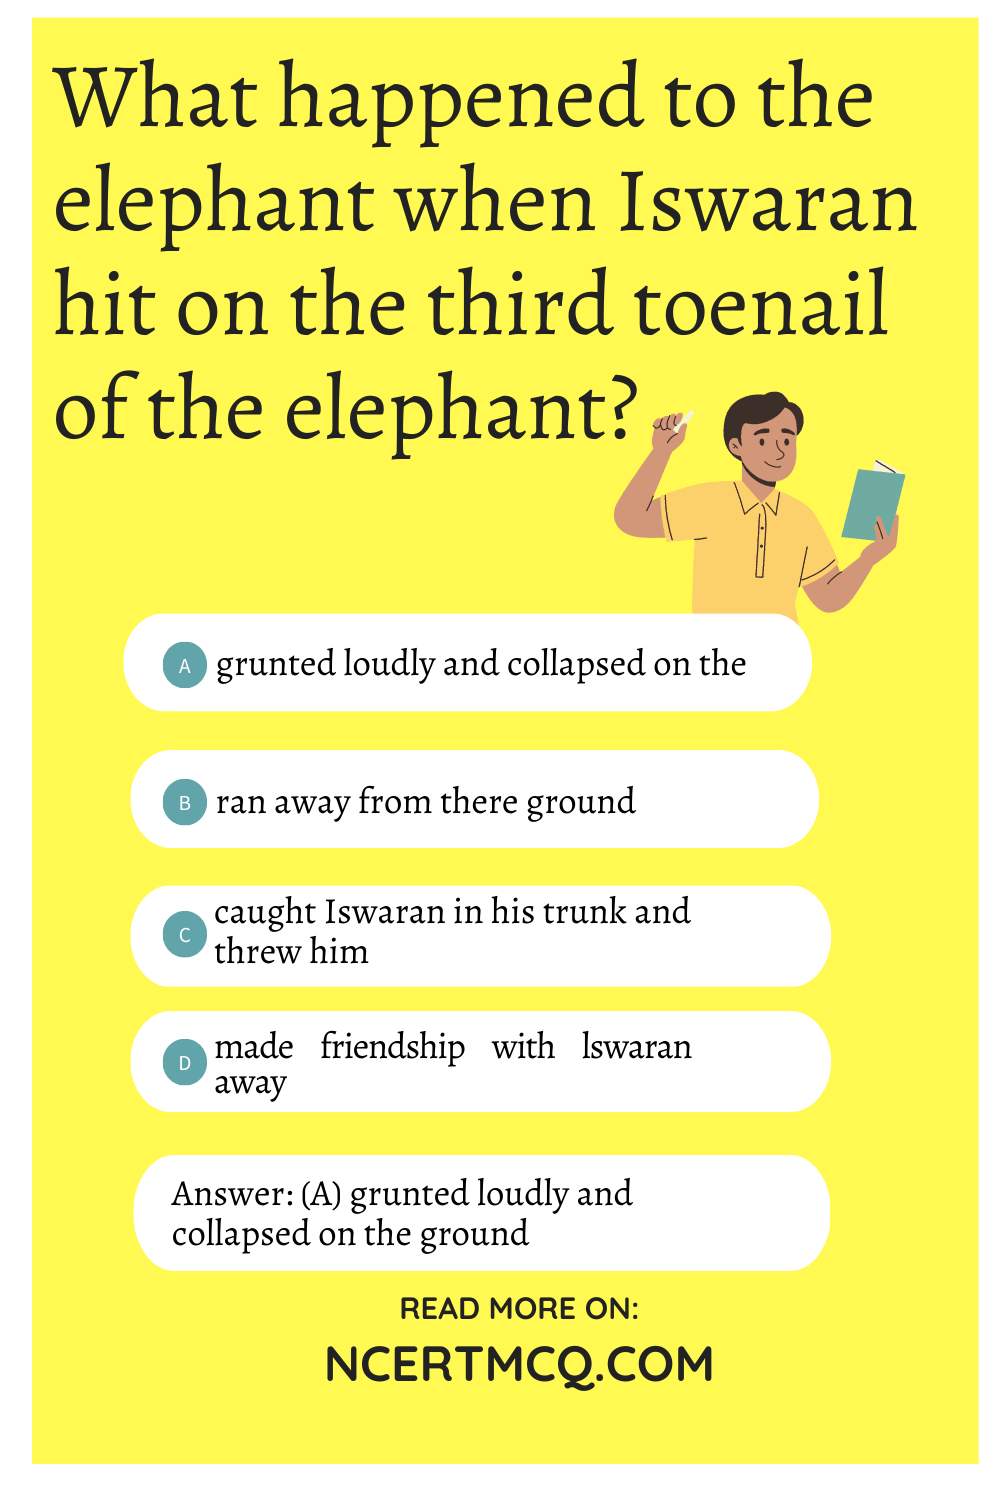 What happened to the elephant when Iswaran hit on the third toenail of the elephant?